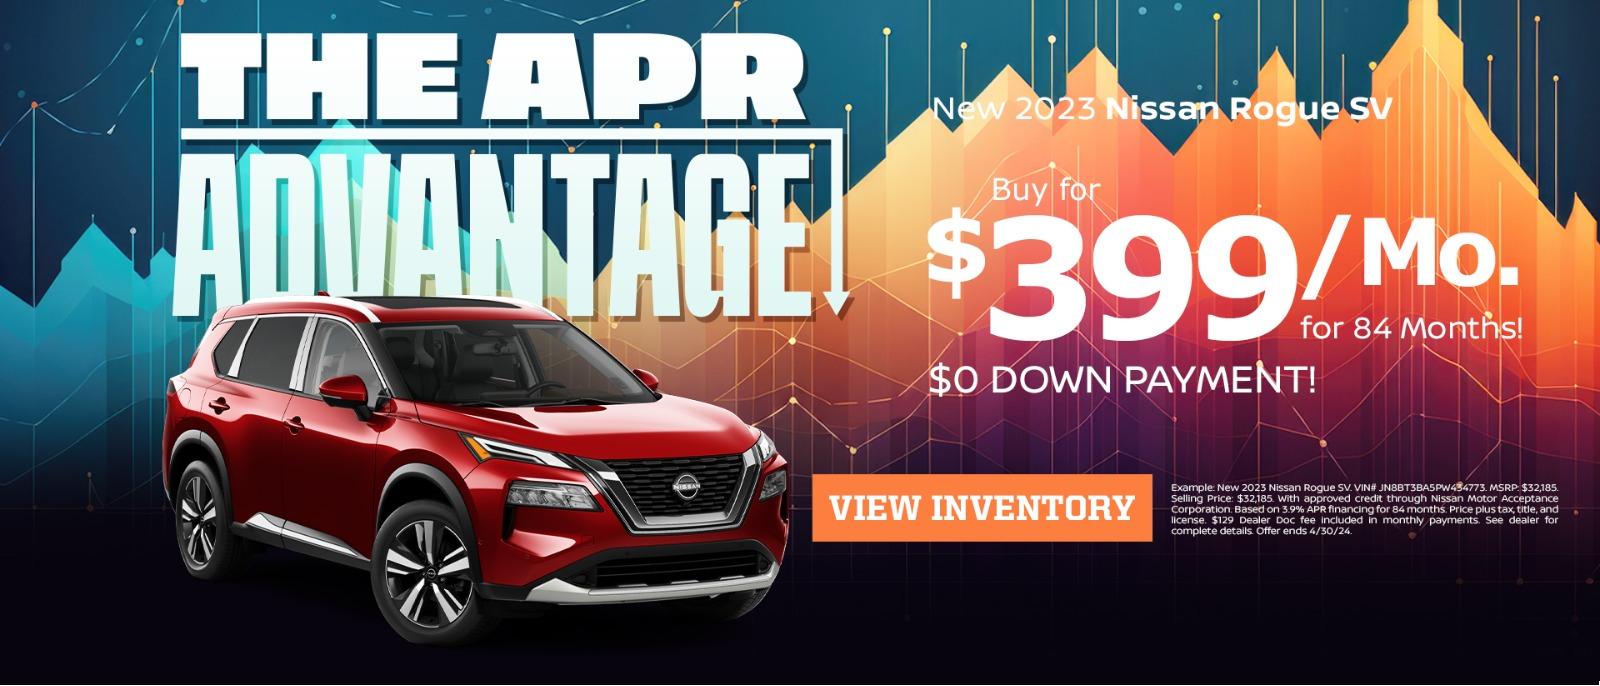 New 2023 Nissan Rogue SV
Buy for $399/mo for 84 months!
$0 down payment!